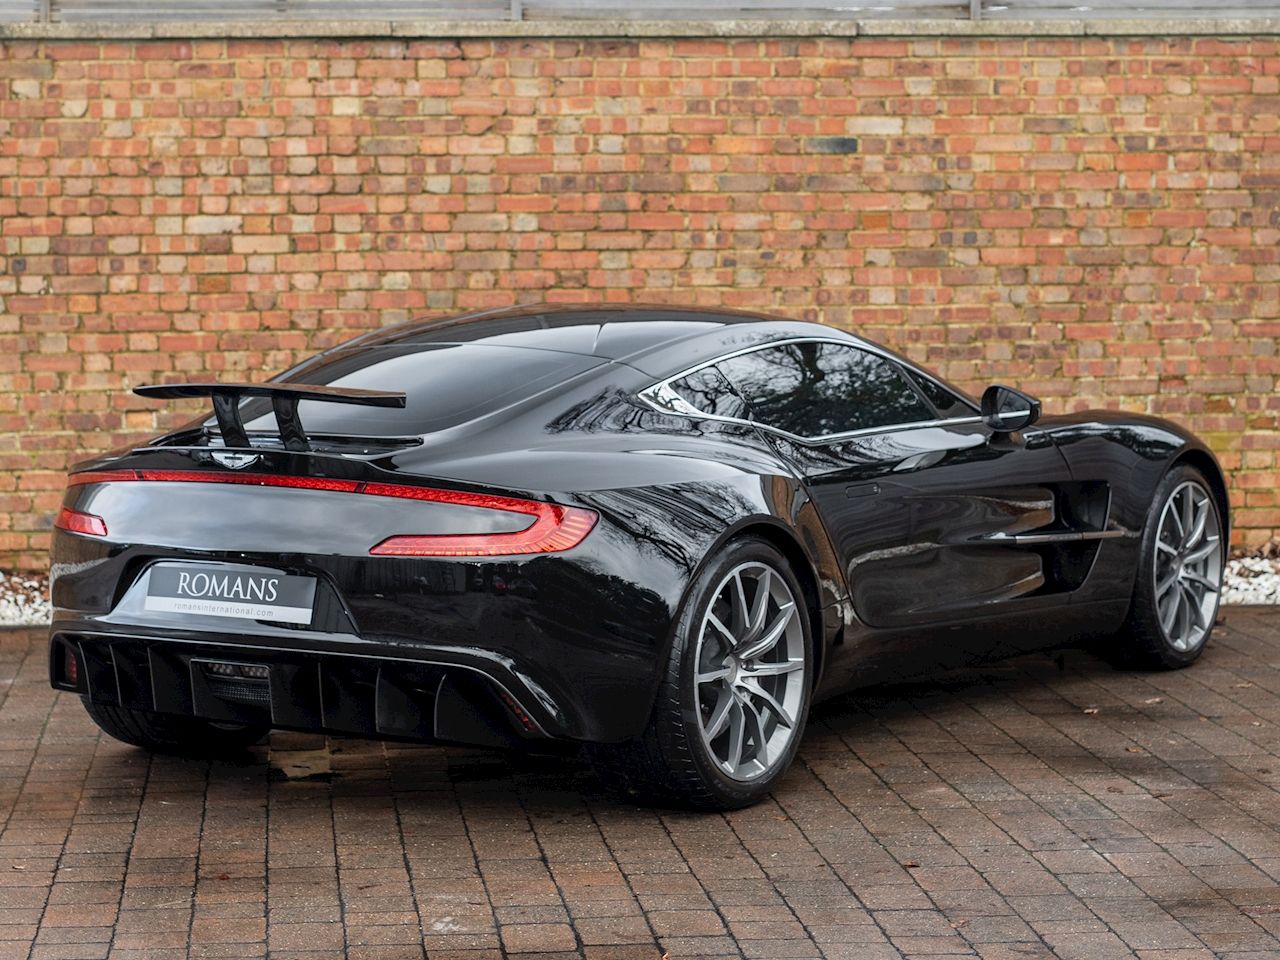 Aston Martin One-77 Parked Outside